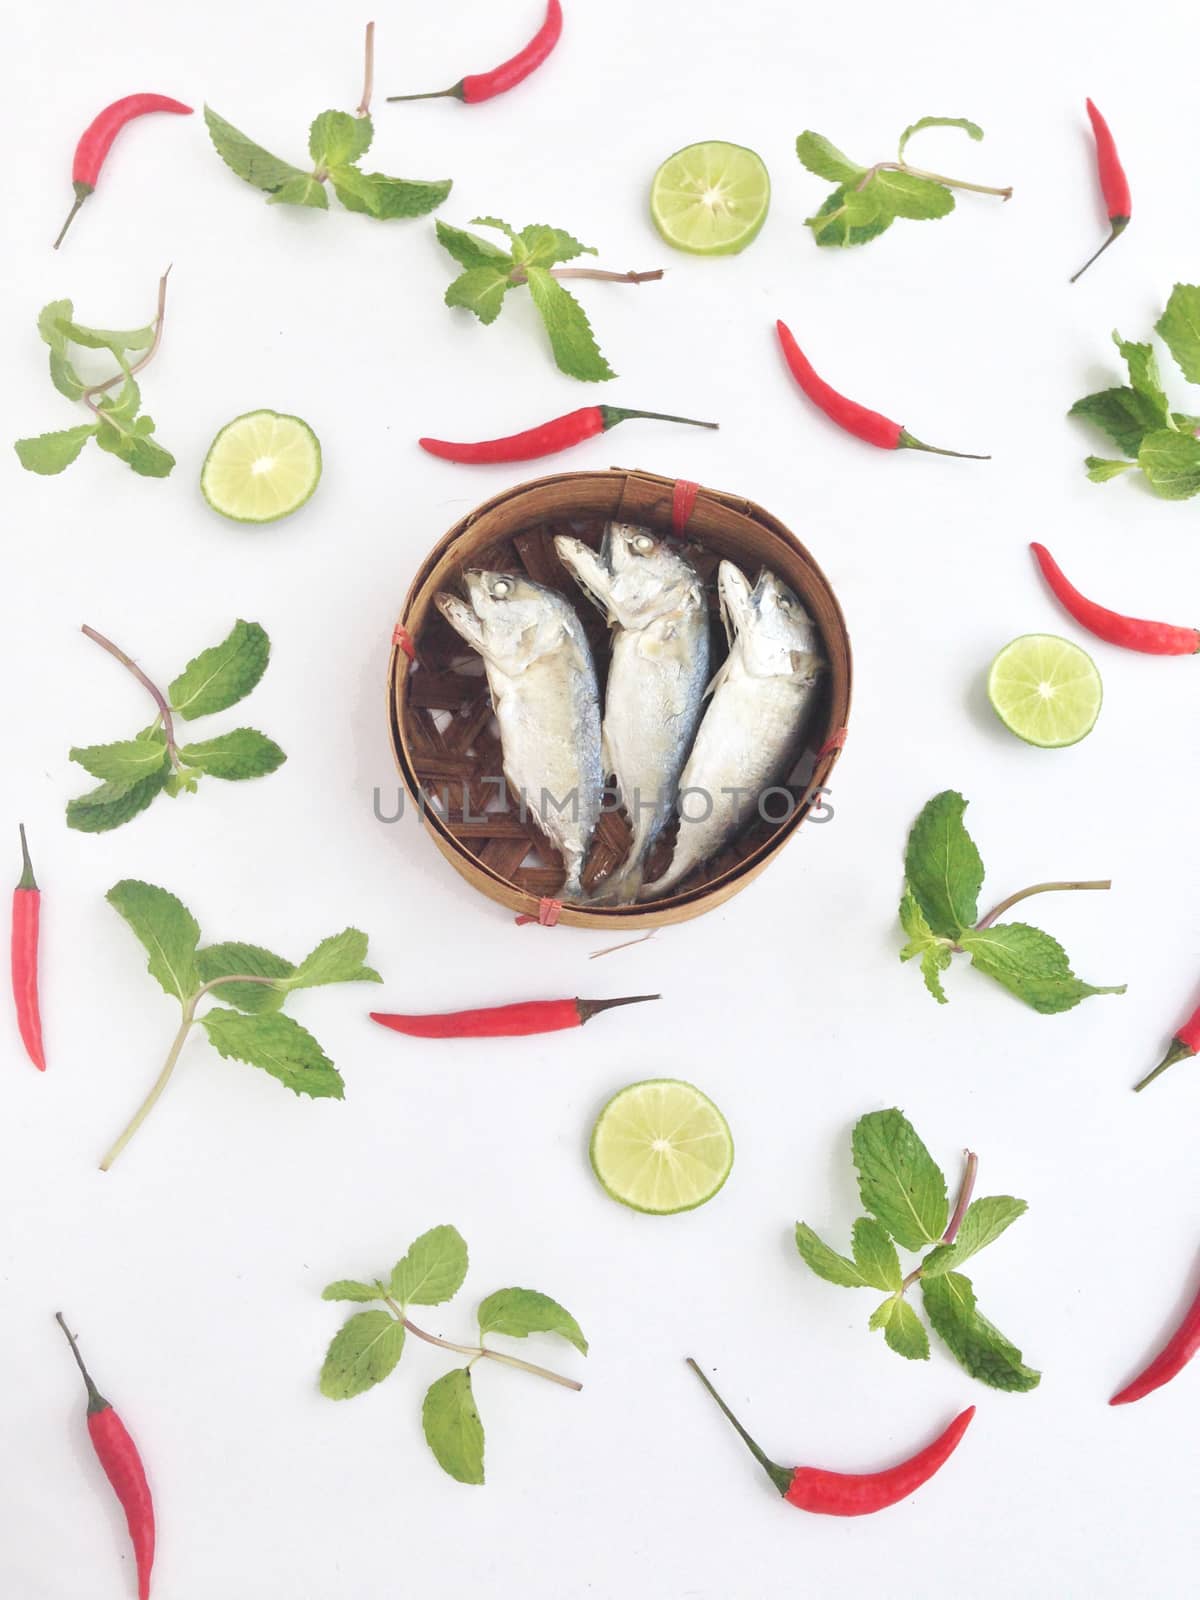 short mackerel on fish basket with chili paper mint and lime by Bowonpat